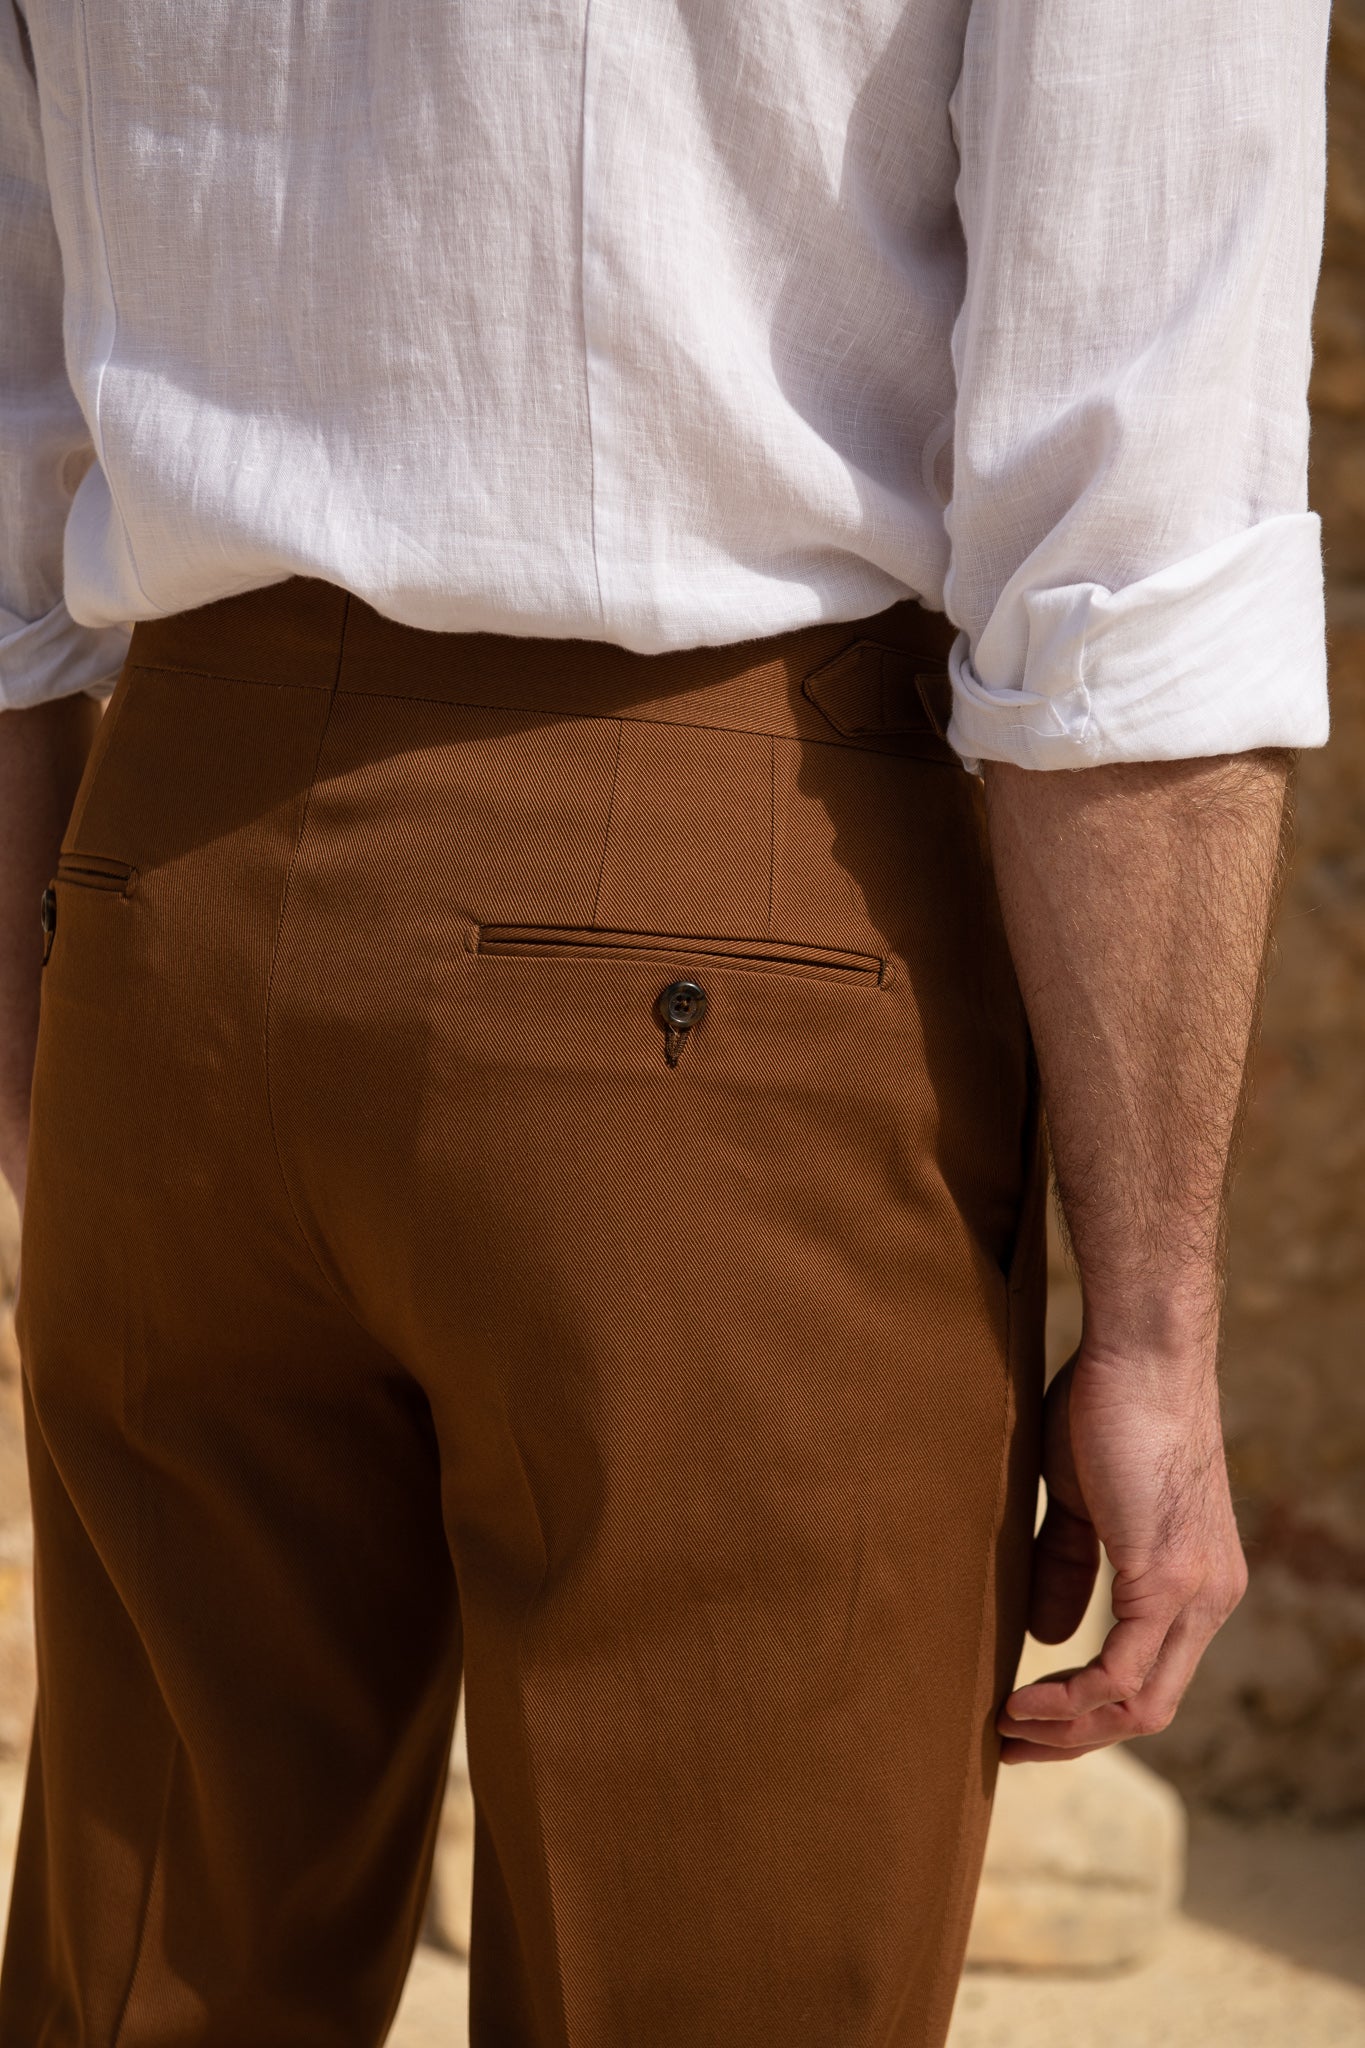 Cognac cotton trousers "Soragna Capsule Collection" - Made in Italy